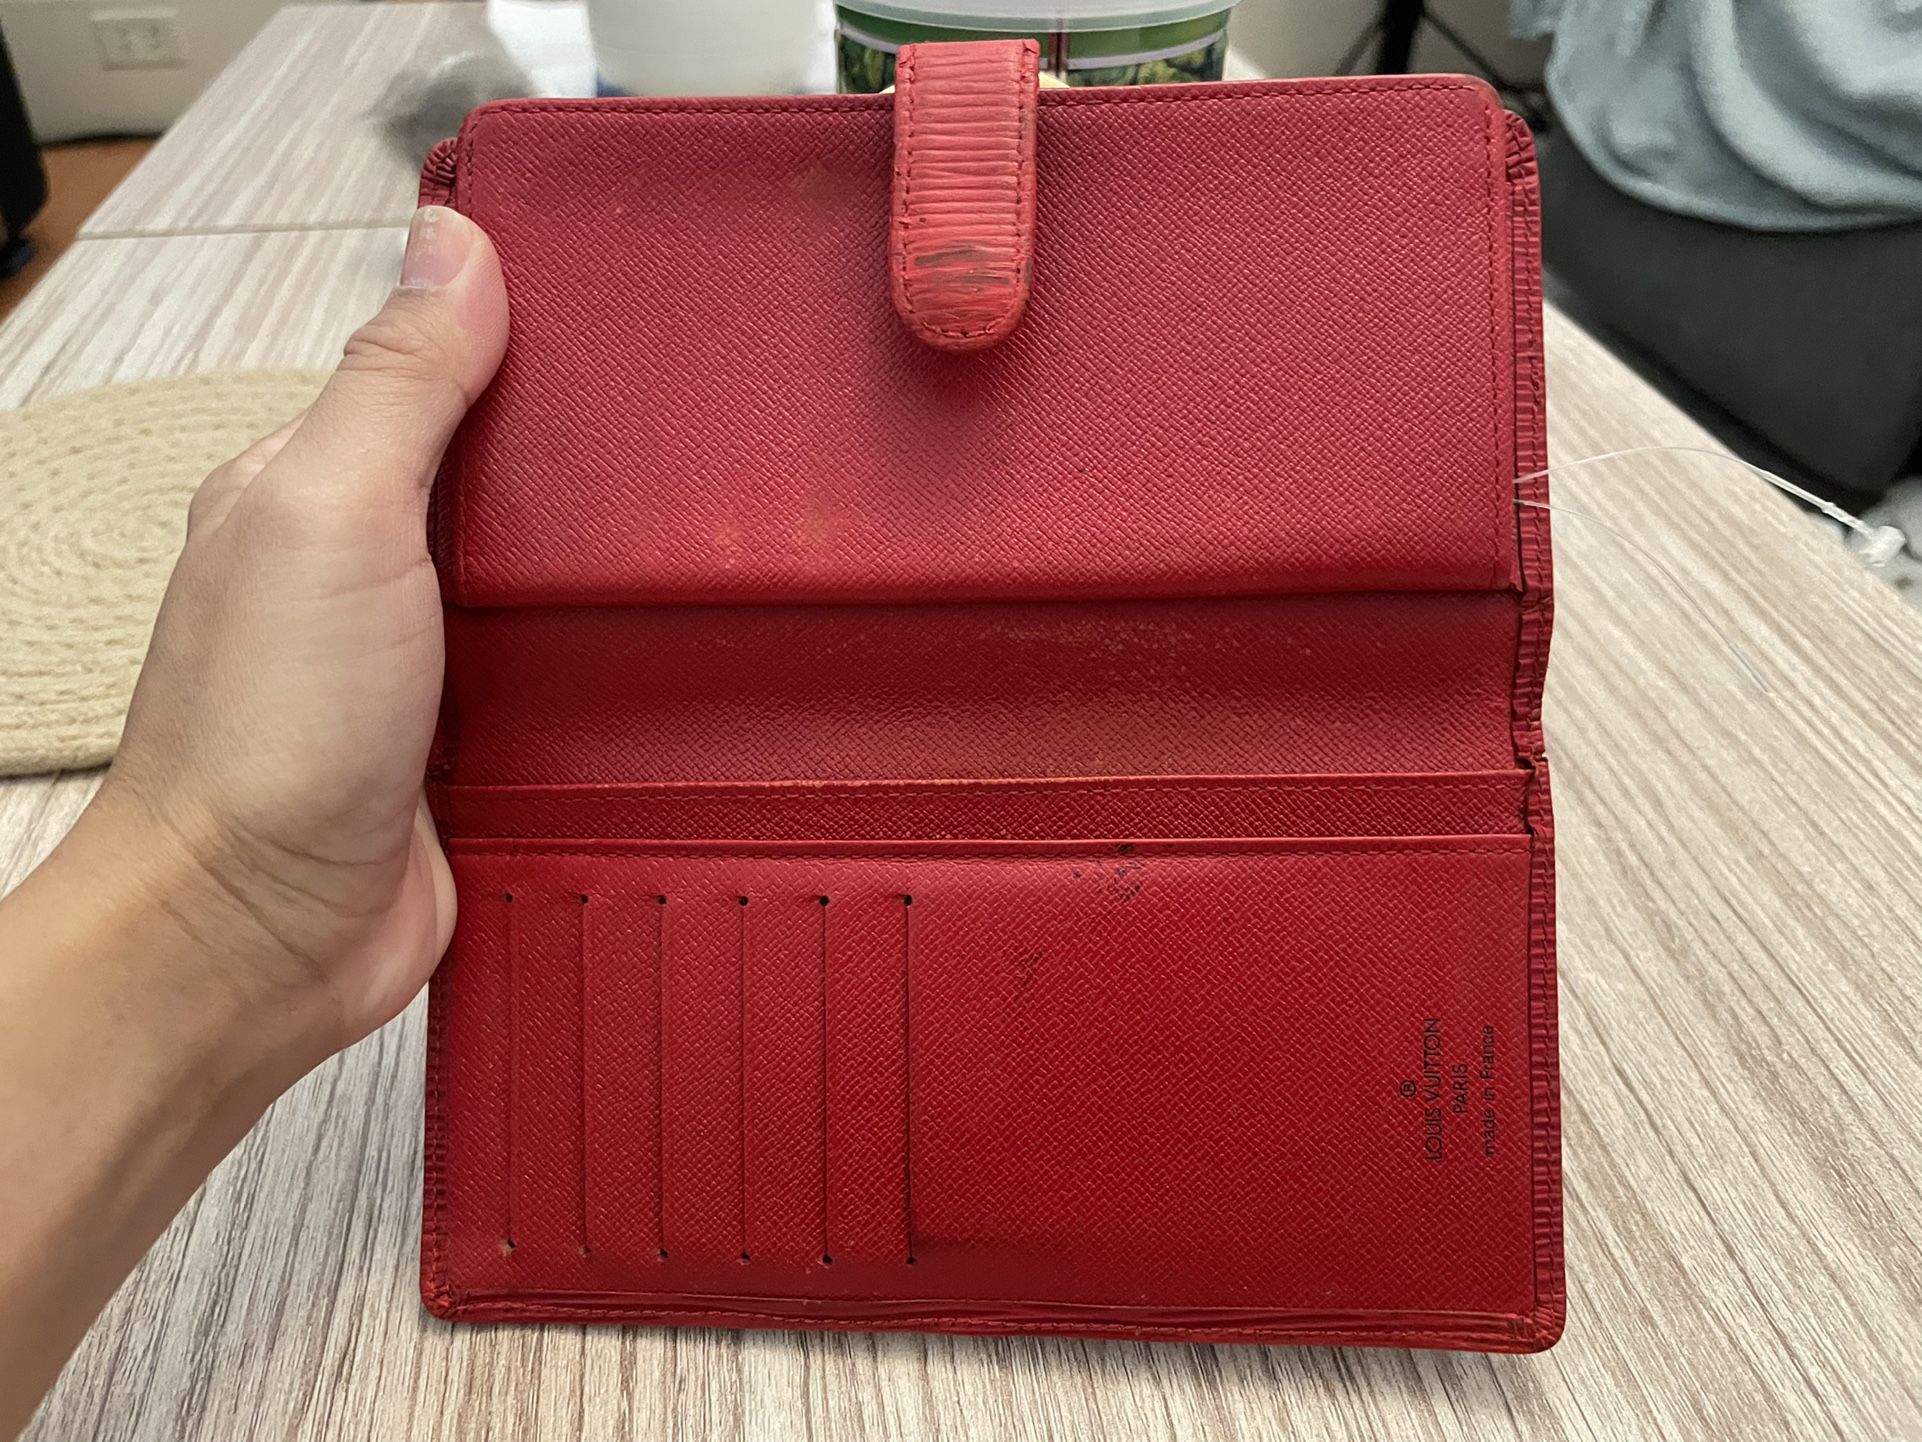 Louis Vuitton M61269 Adele Wallet for Sale in San Francisco, CA - OfferUp